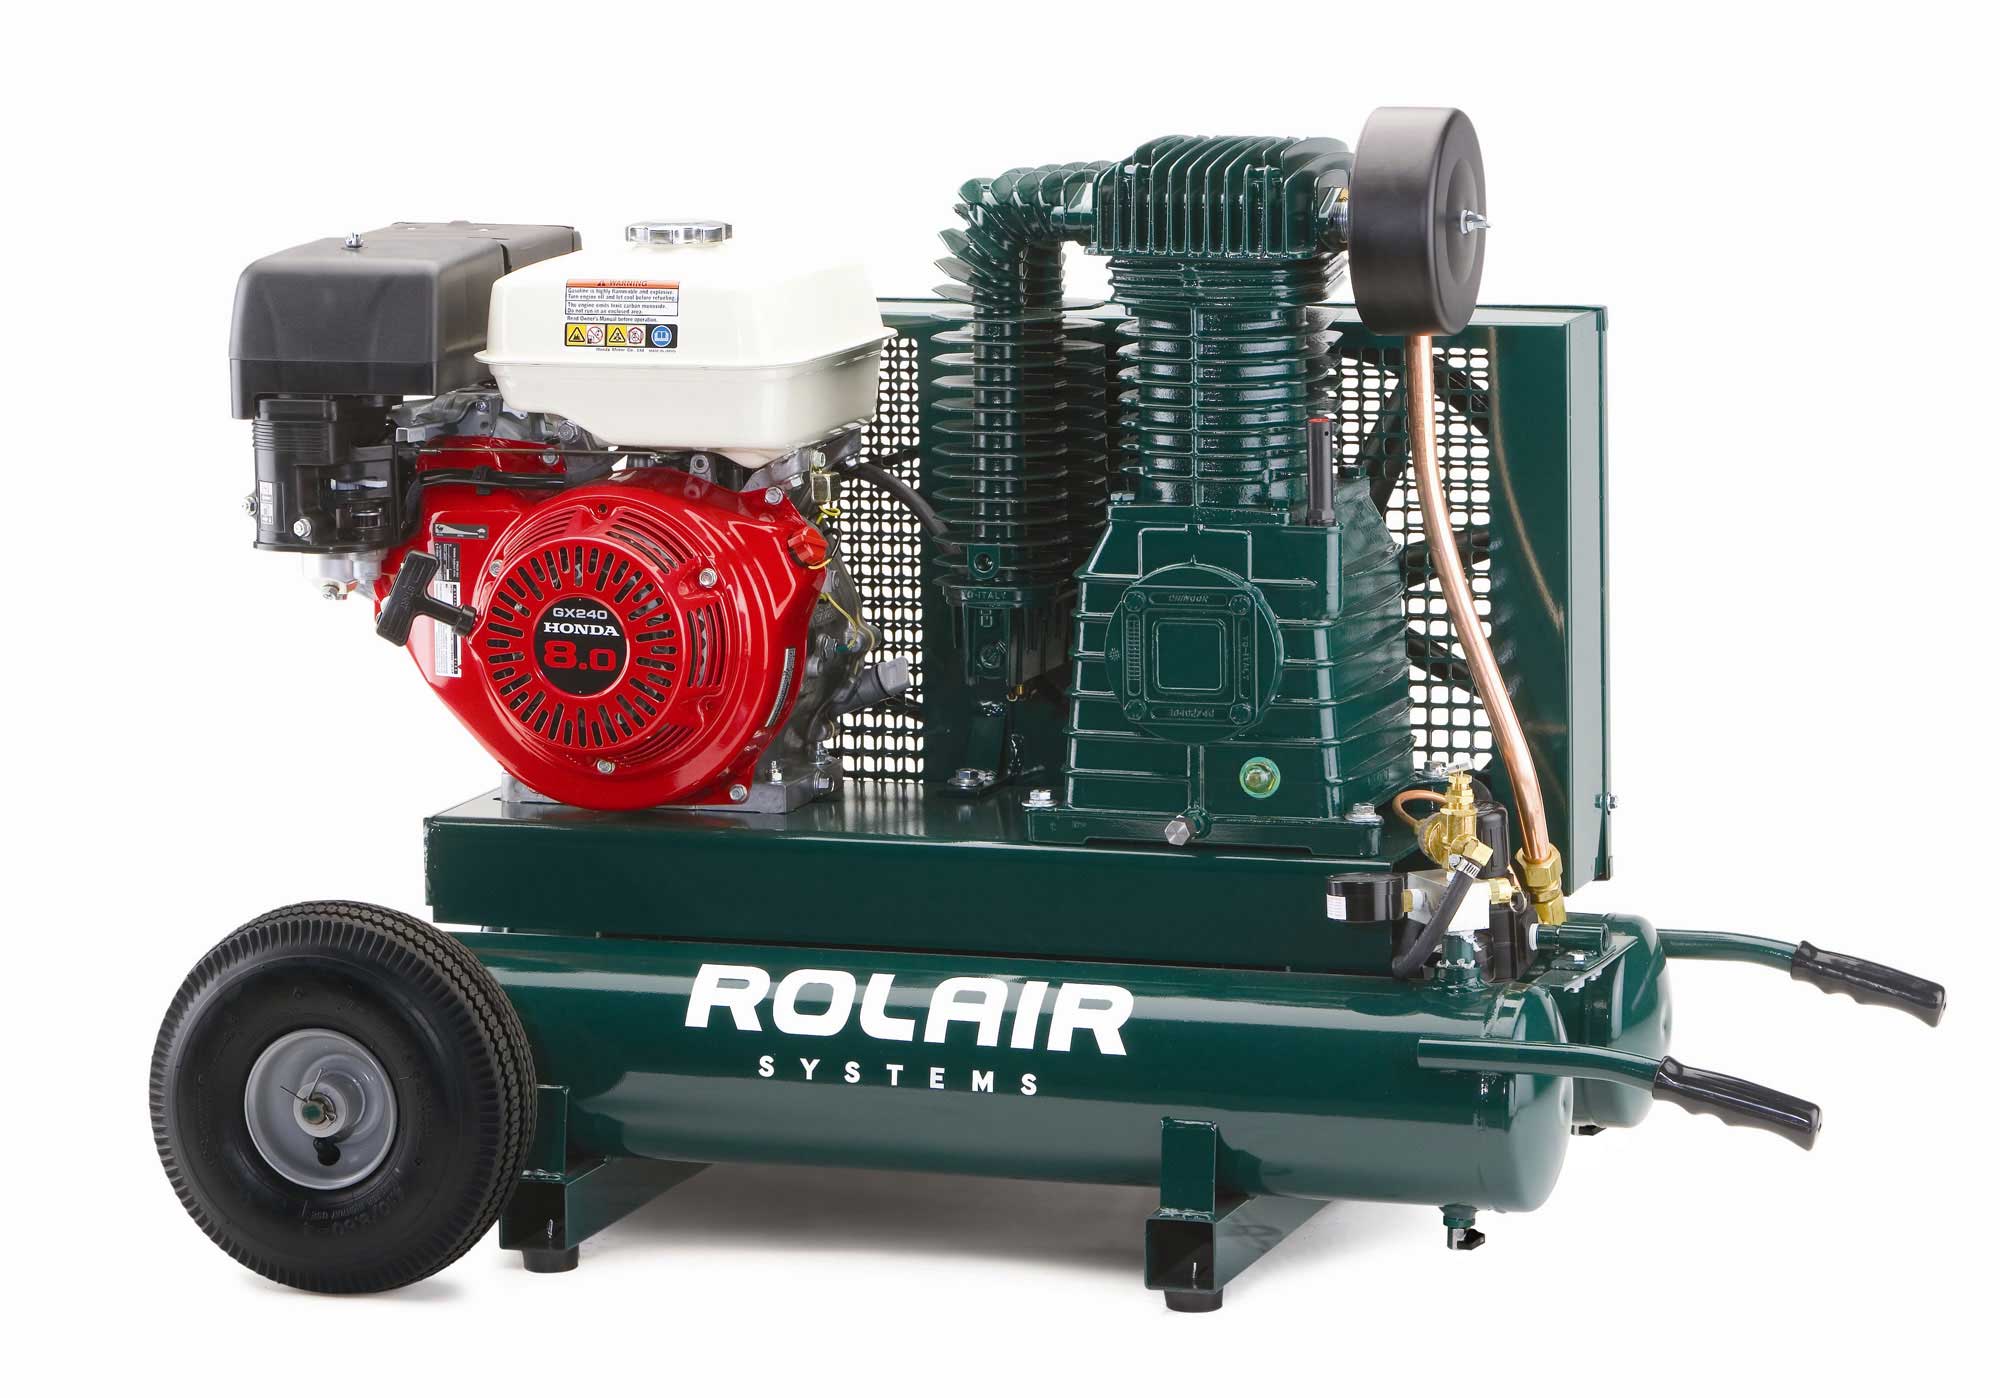 Rolair 8422HK30 Gas Powered Wheeled Air Compressor - wise-line-tools